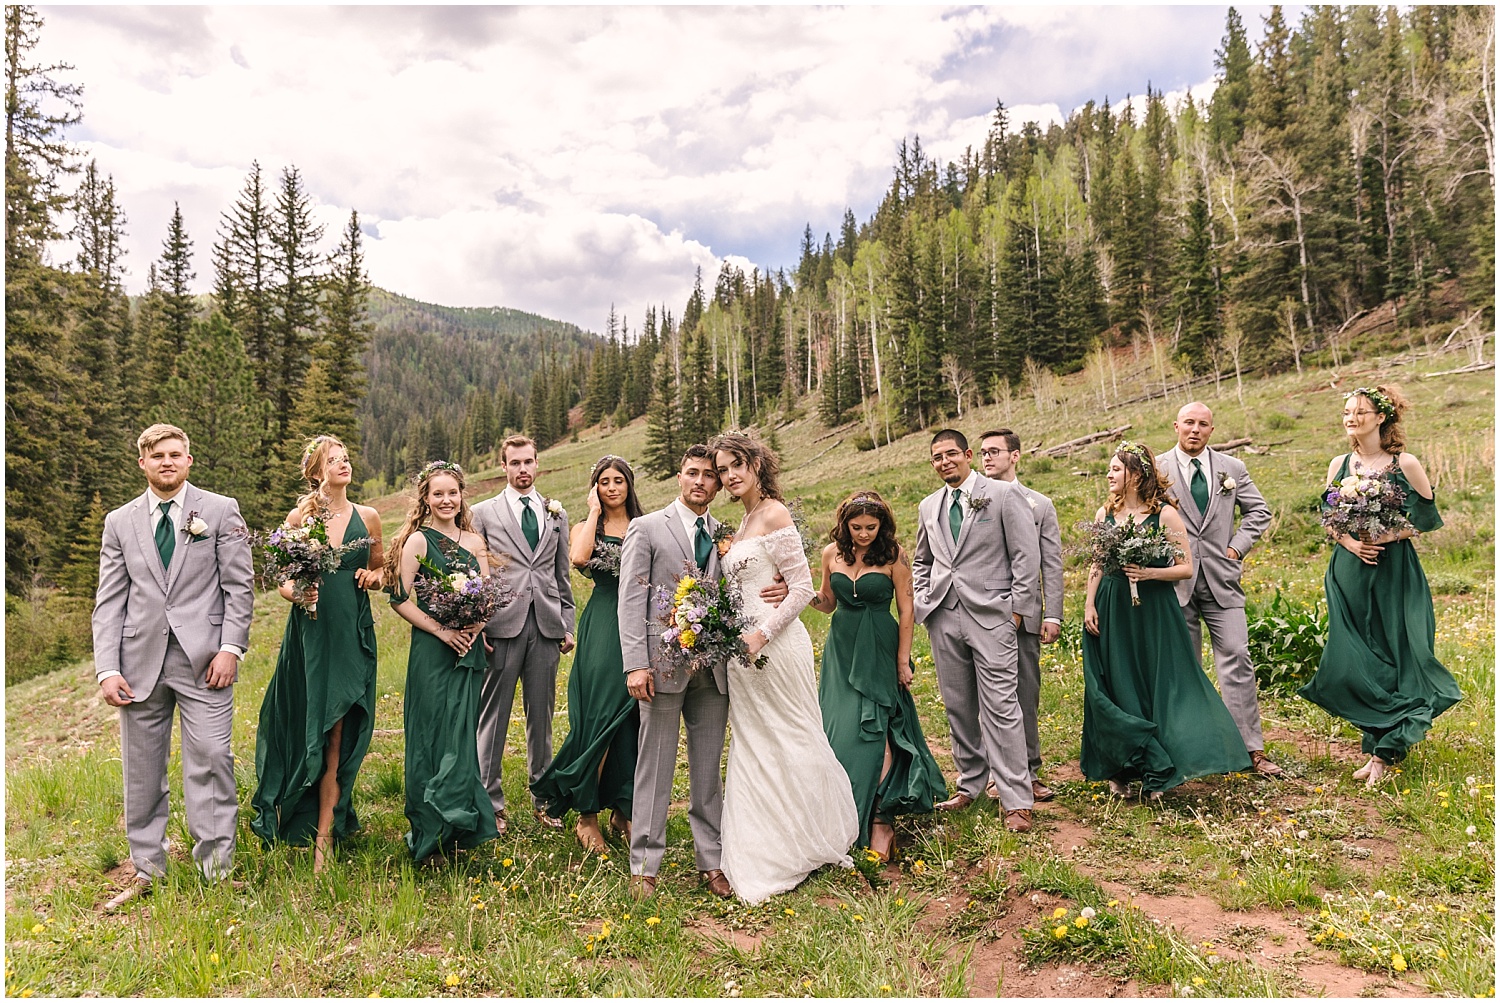 Bridesmaids in forest green dresses and groomsmen in light gray suits for mountain wedding near Telluride